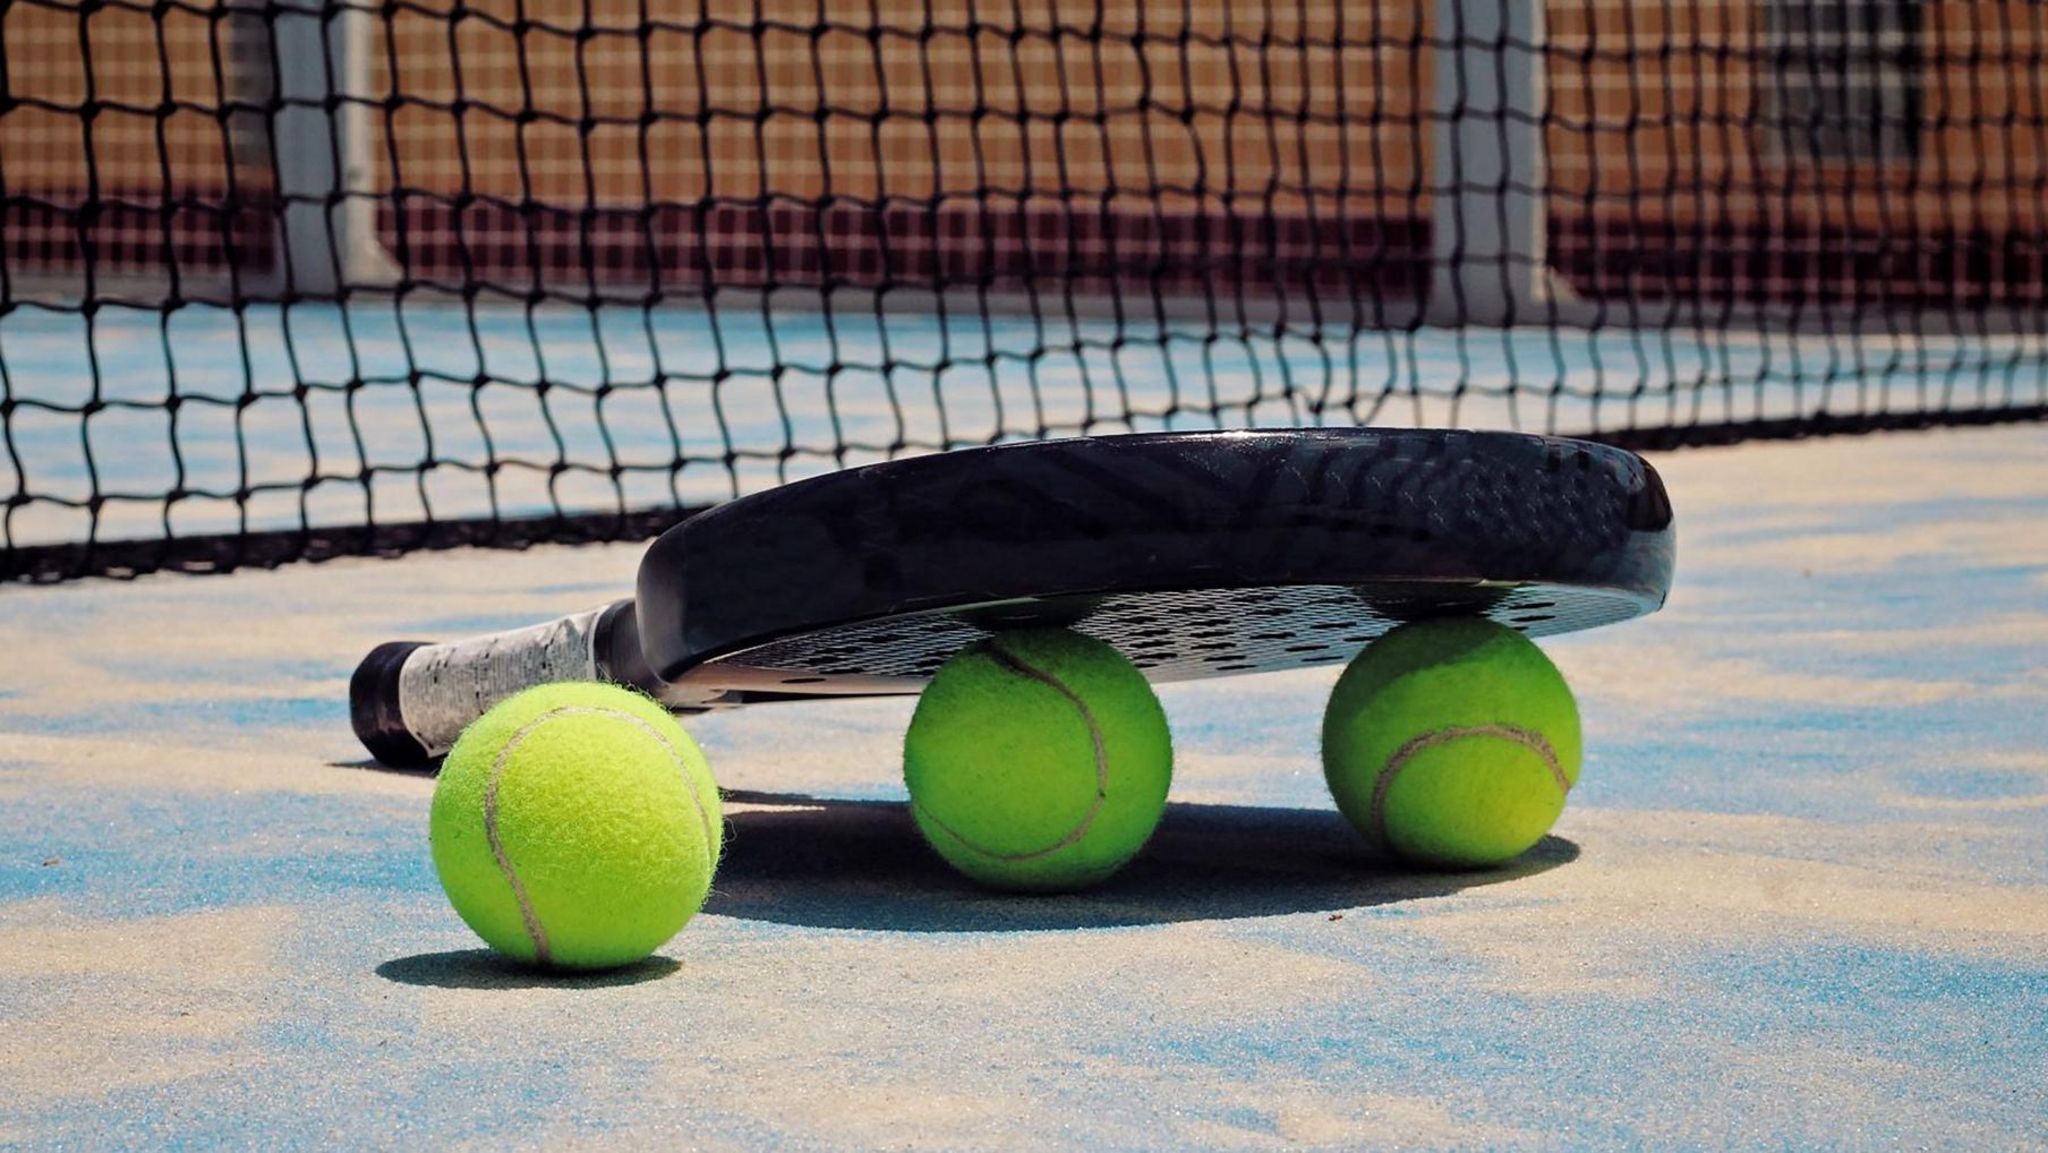 A padel racquet and balls on the floor next to a net